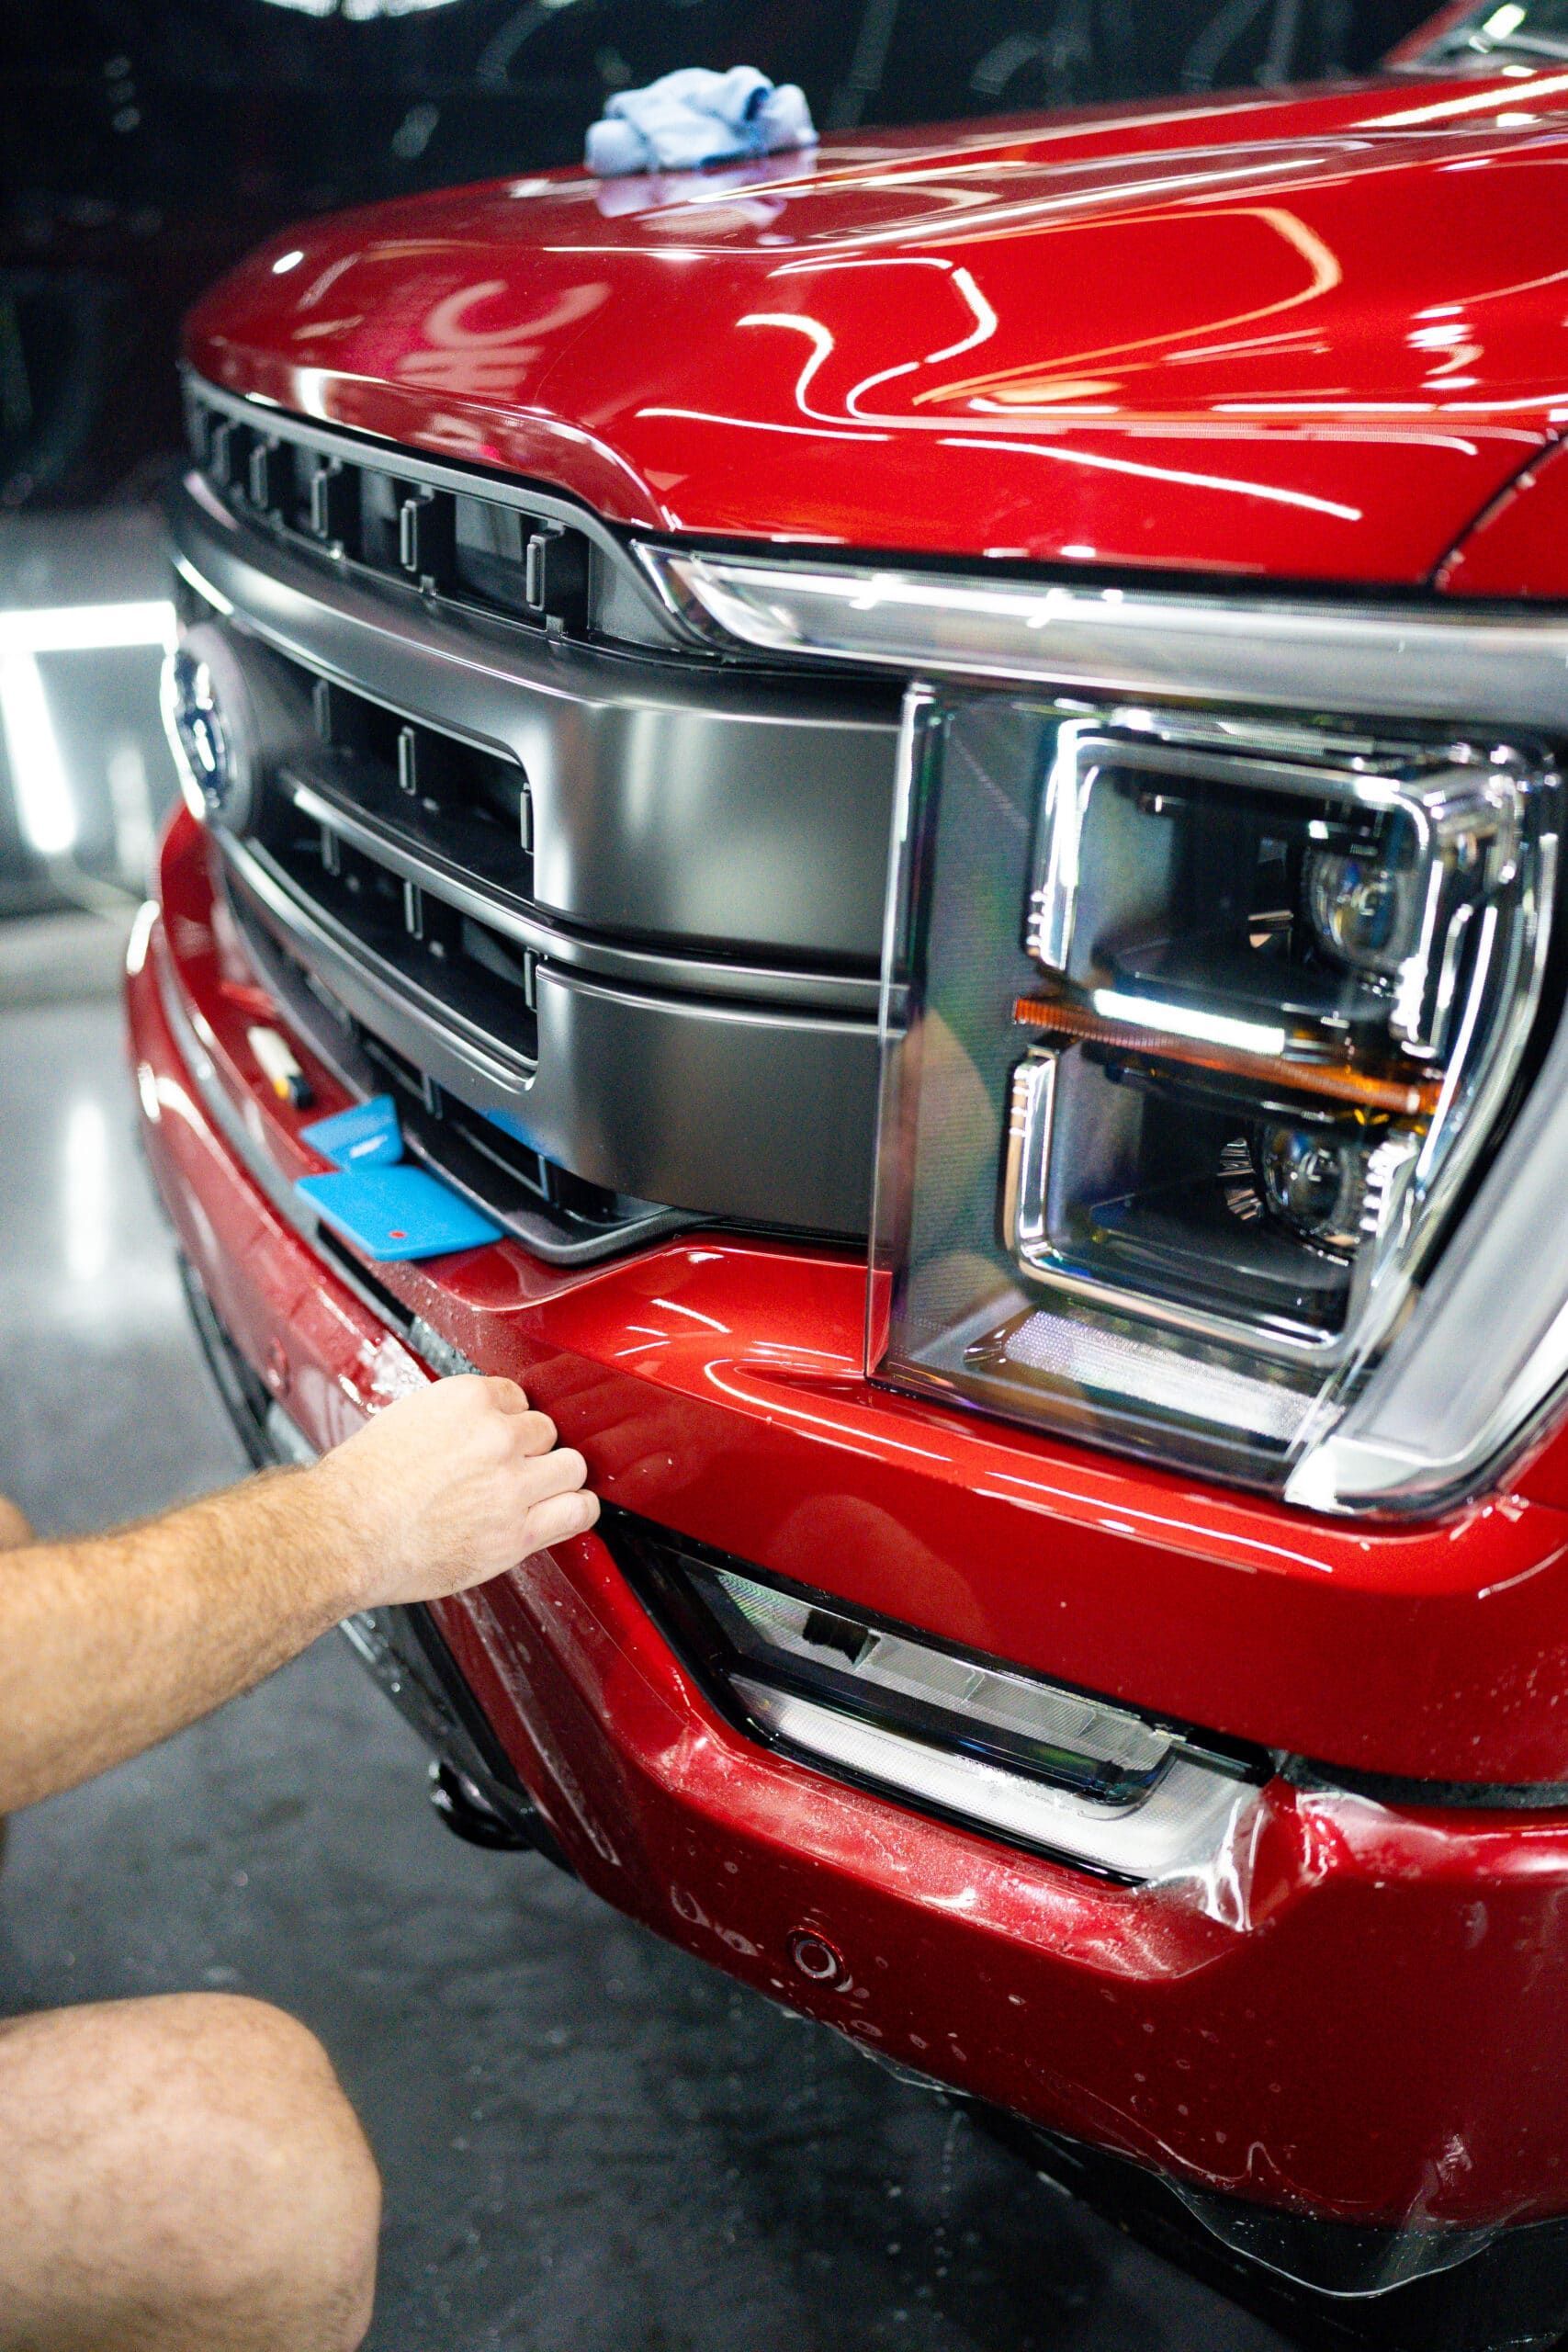 A man is applying a protective film to the front of a red truck.